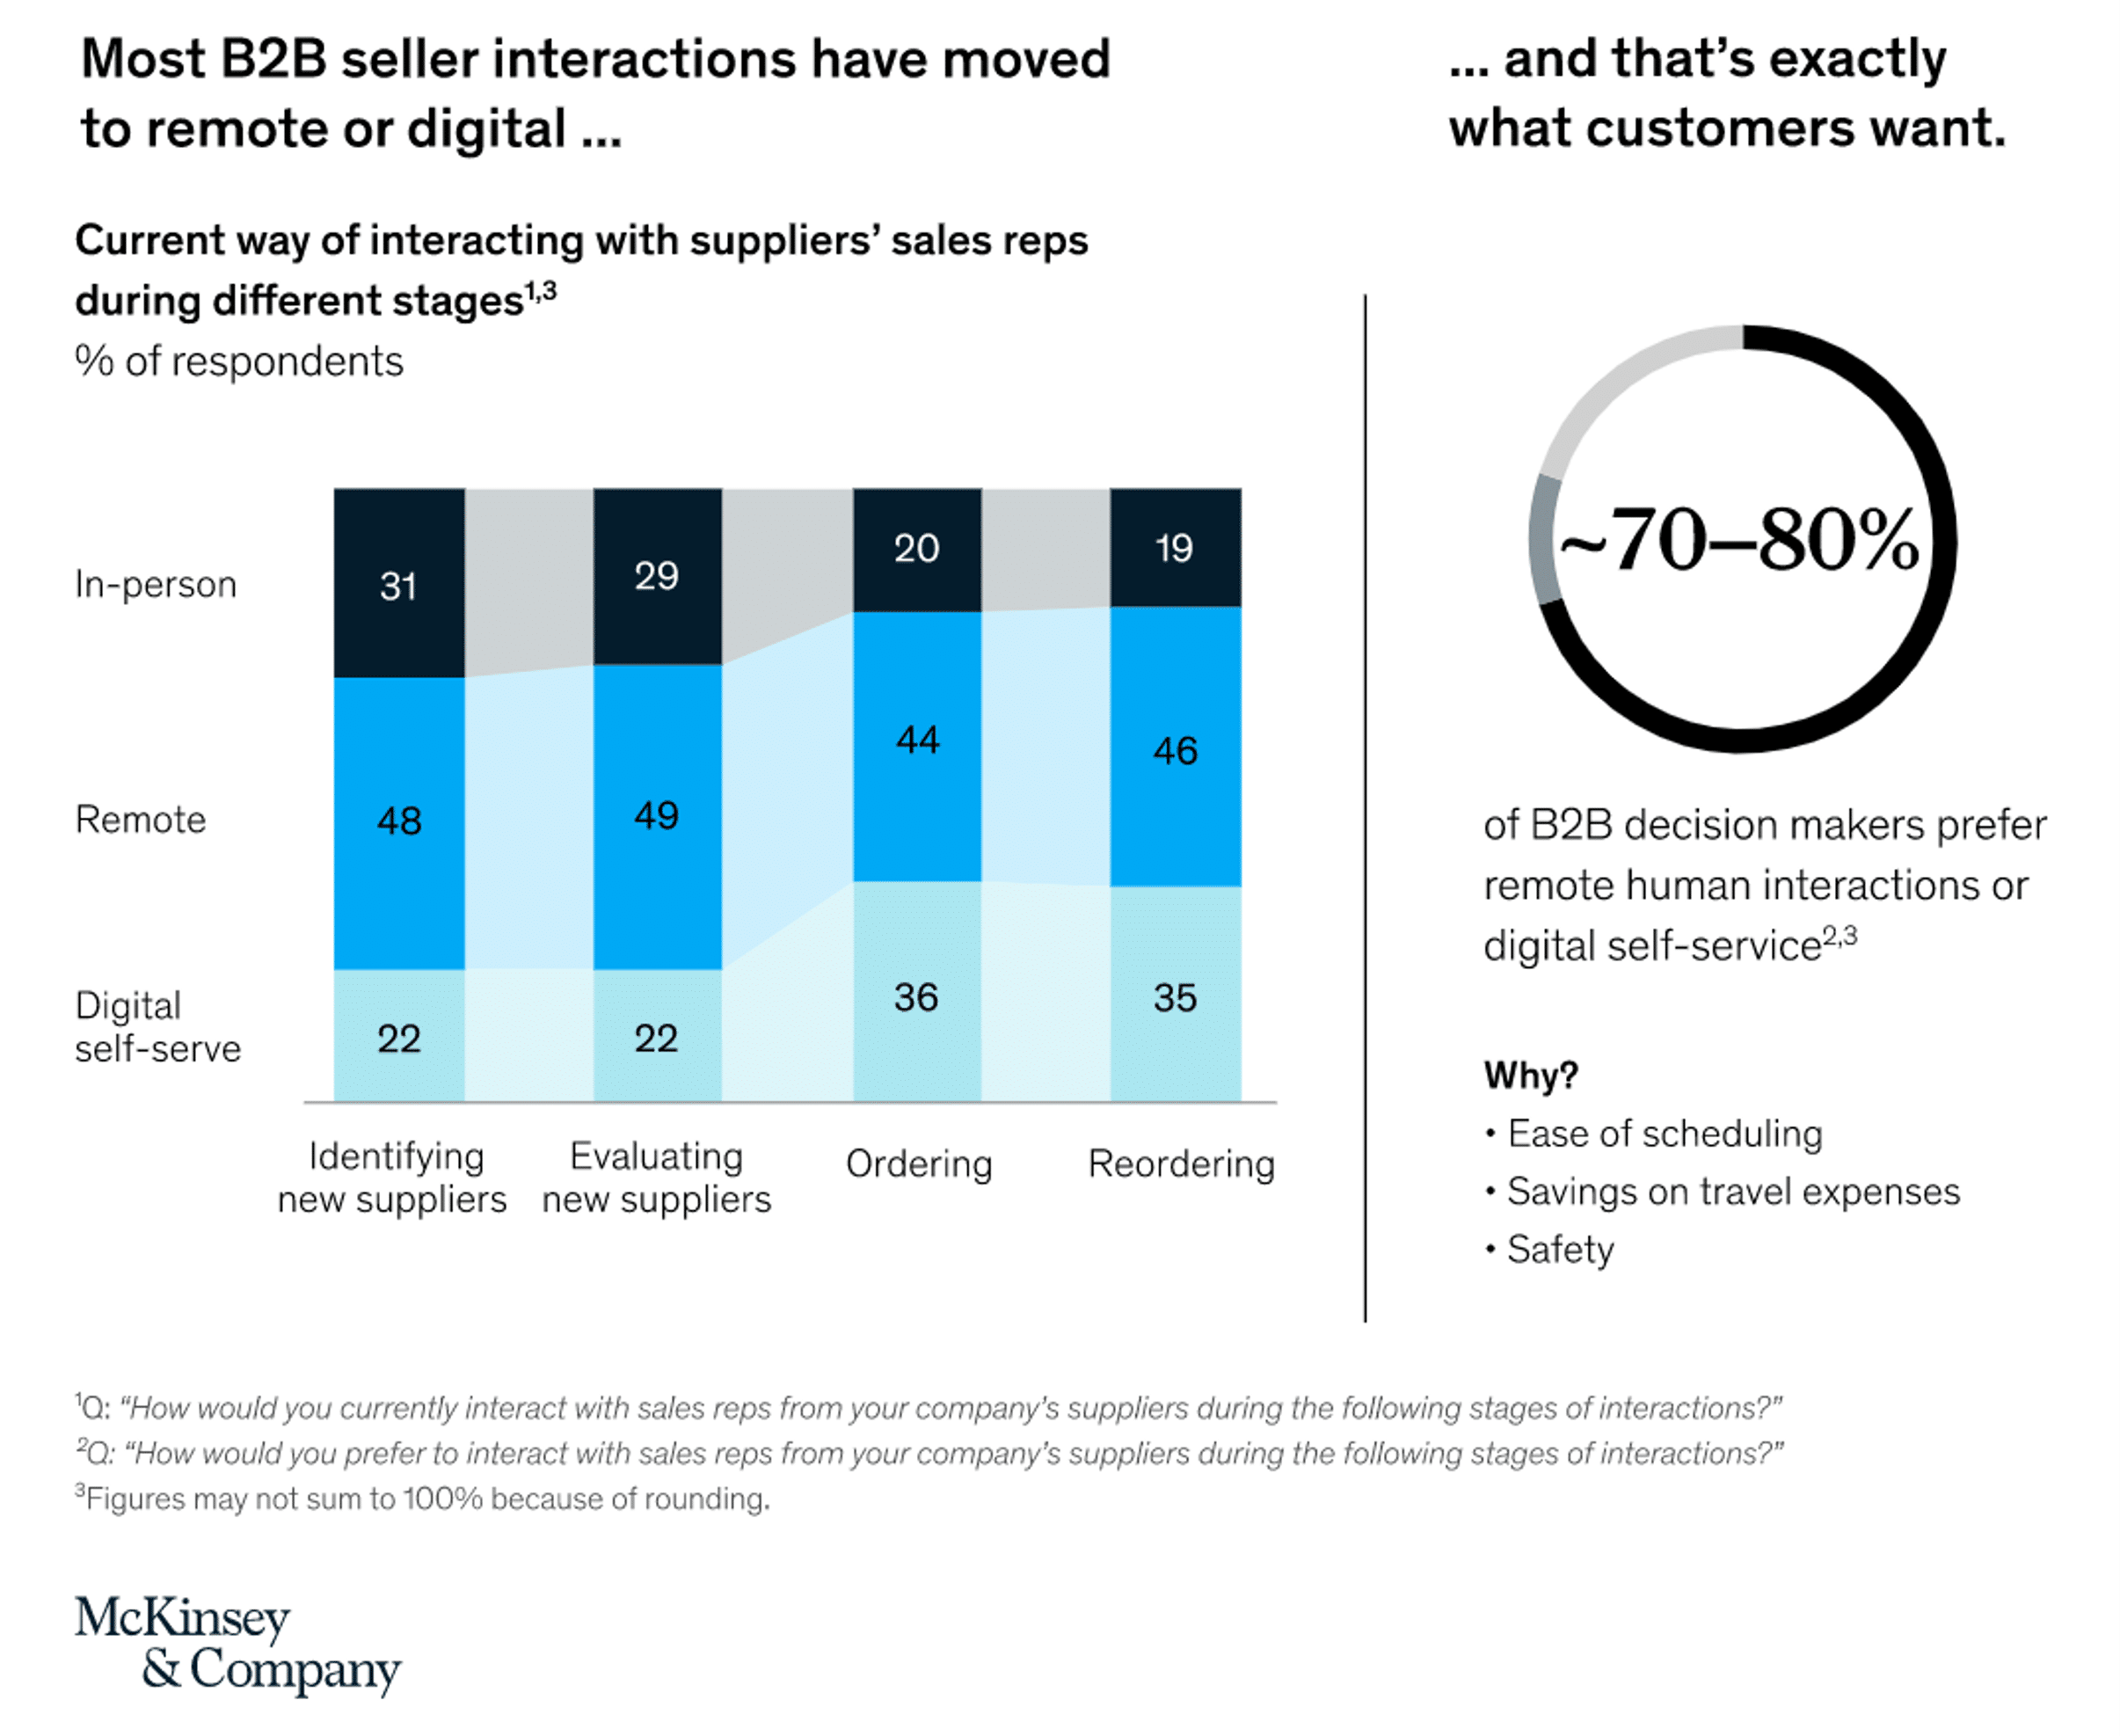 b2b buyers interacations move to digital or remote which helps b2b blogging